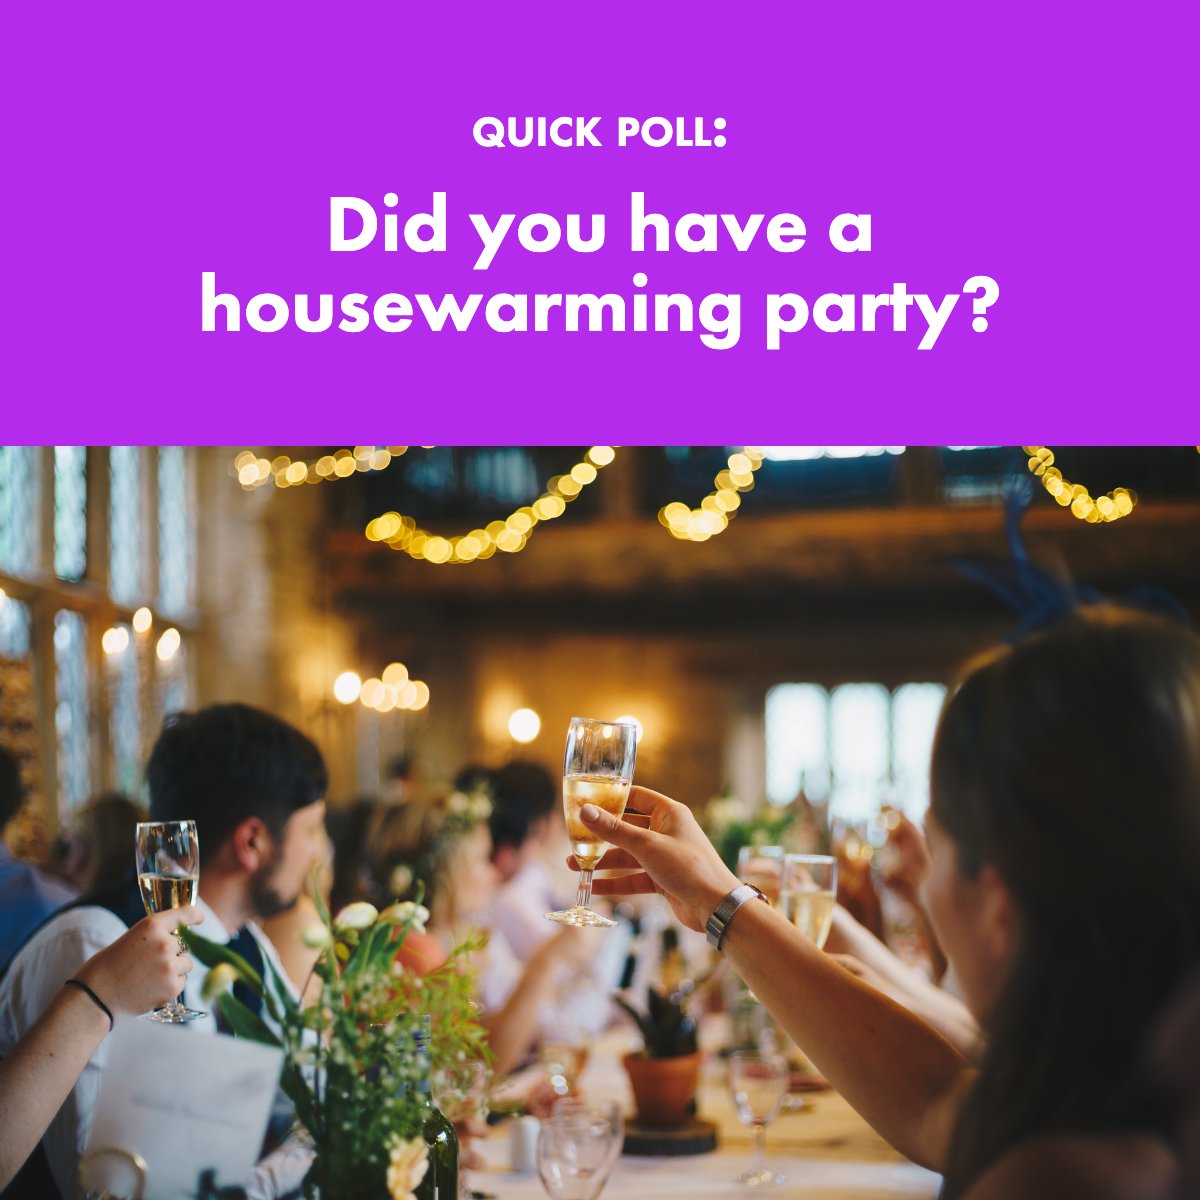 Did anything funny happen? 😎

#Newhome #Party #housewarming #house 
 #AmericasMortgageSolutions #christianpenner #onestopbrokershop #mortgagebrokerwestpalmbeach #epicrealeststedeals #TheChristianPennerMortgageTeam #mortgagebrokerflorida #mortgageadvice